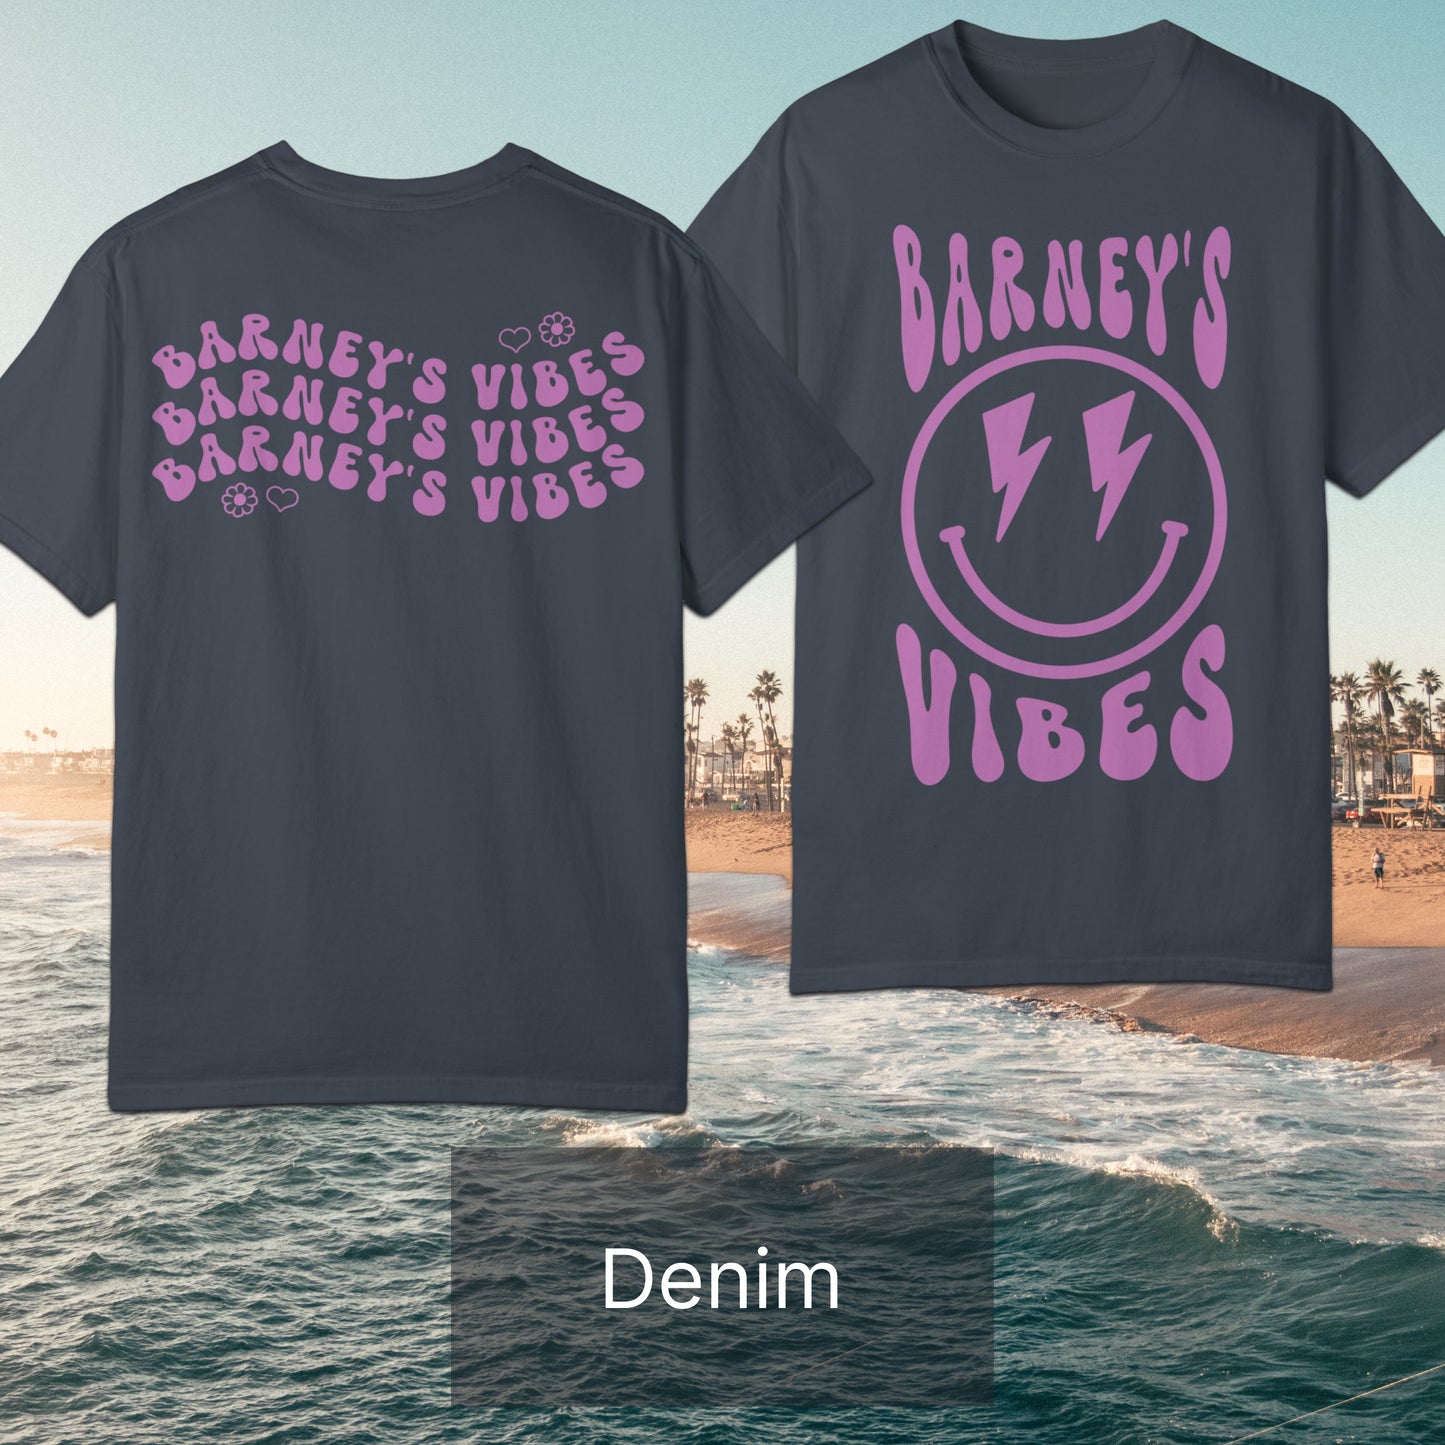 Barney's Vibes | BARNEY'S BEANERY - Women's Smiley Face Tee | Berry Graphics On Denim T-Shirt, Front And Back Flat Lay View